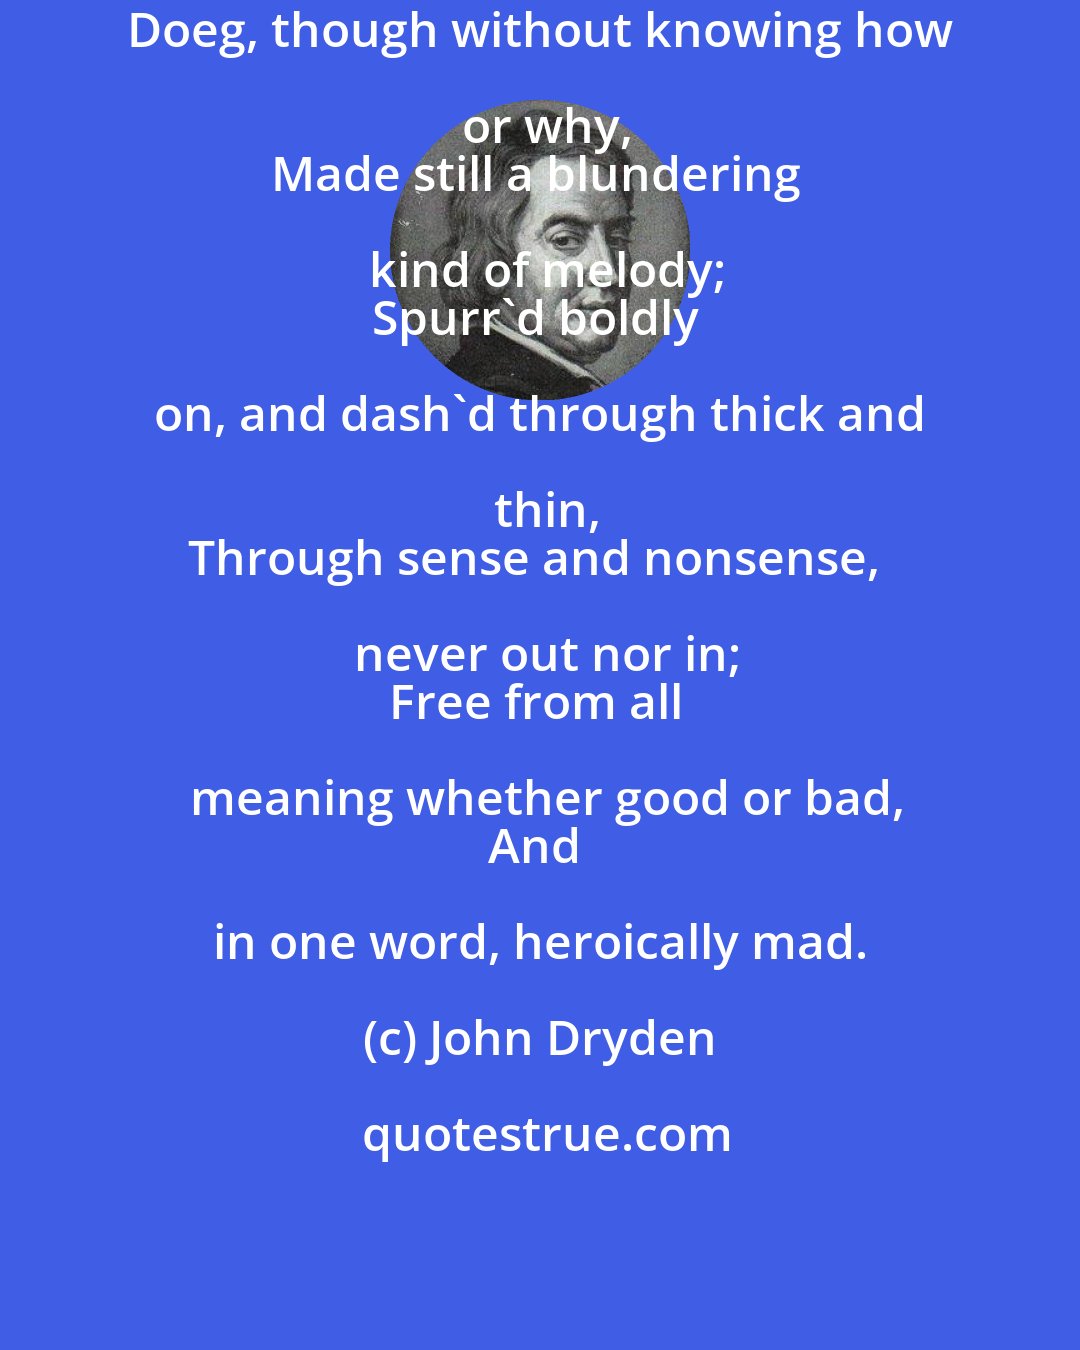 John Dryden: Doeg, though without knowing how or why,
Made still a blundering kind of melody;
Spurr'd boldly on, and dash'd through thick and thin,
Through sense and nonsense, never out nor in;
Free from all meaning whether good or bad,
And in one word, heroically mad.